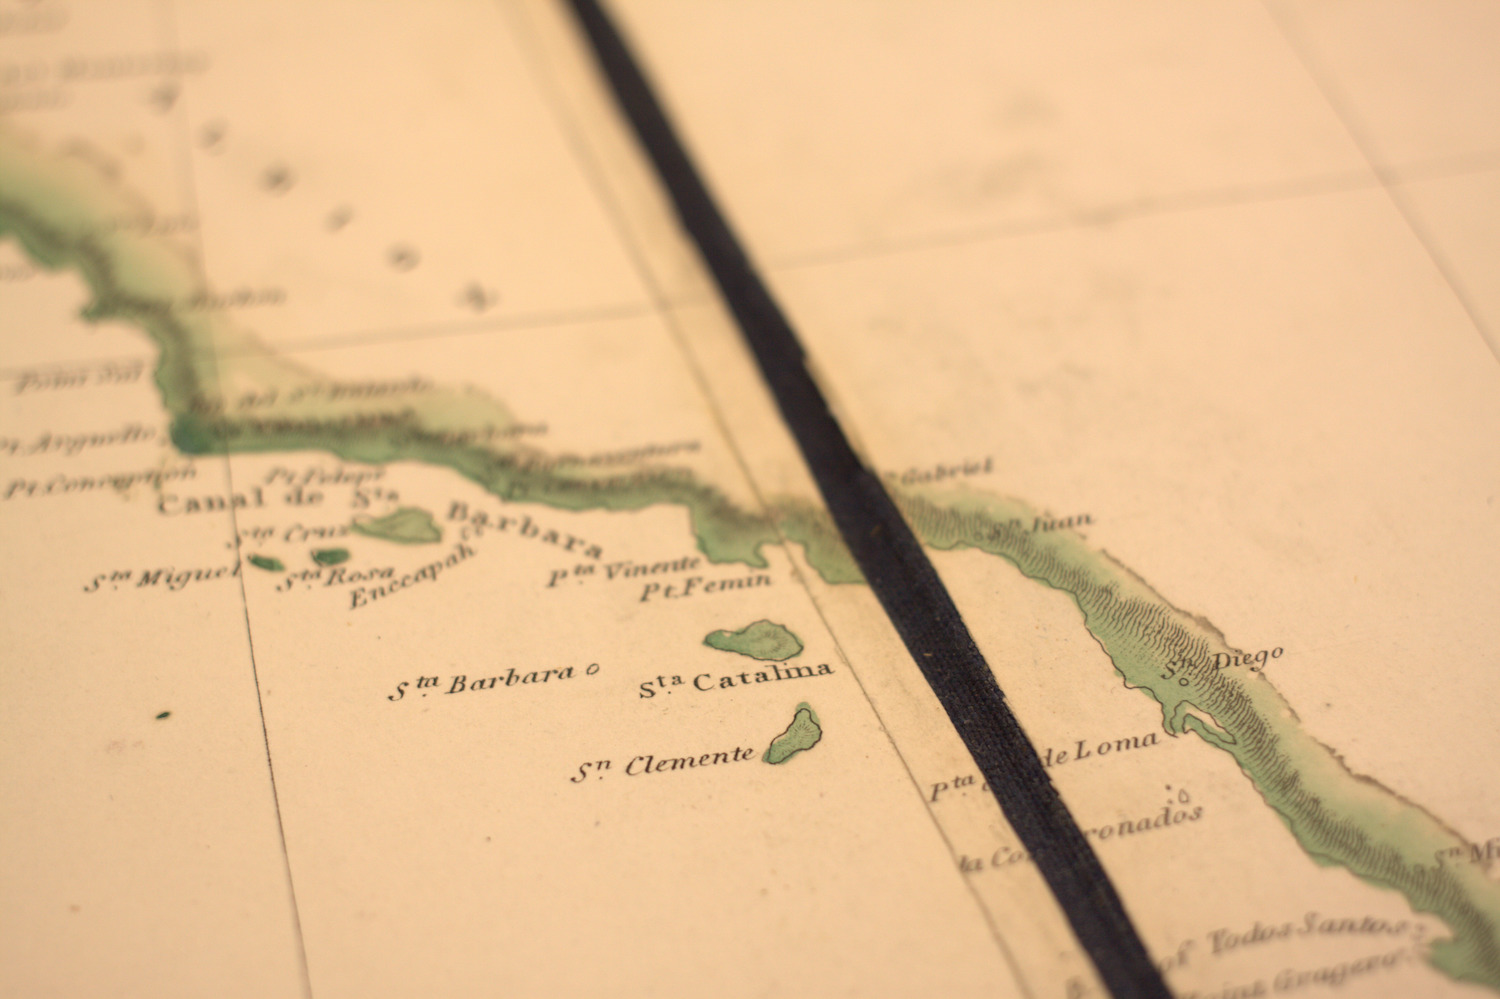 An historic, early map of San Diego and the California coast by Spanish settlers